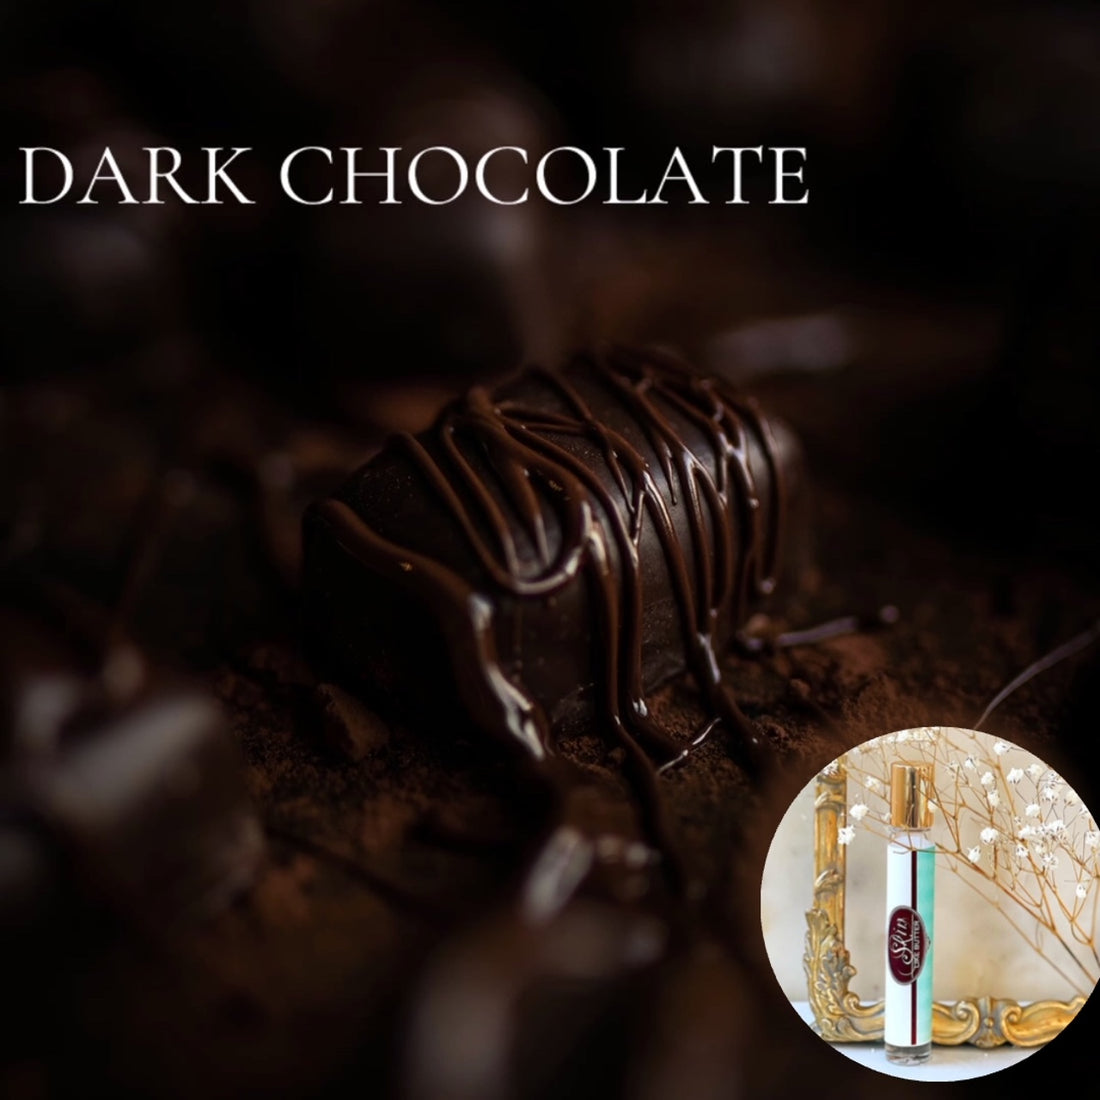 DARK CHOCOLATE Roll On Travel Perfume in a Roll on or Spray bottle  - Buy 1 get 1 50% off-use coupon code 2PLEASE